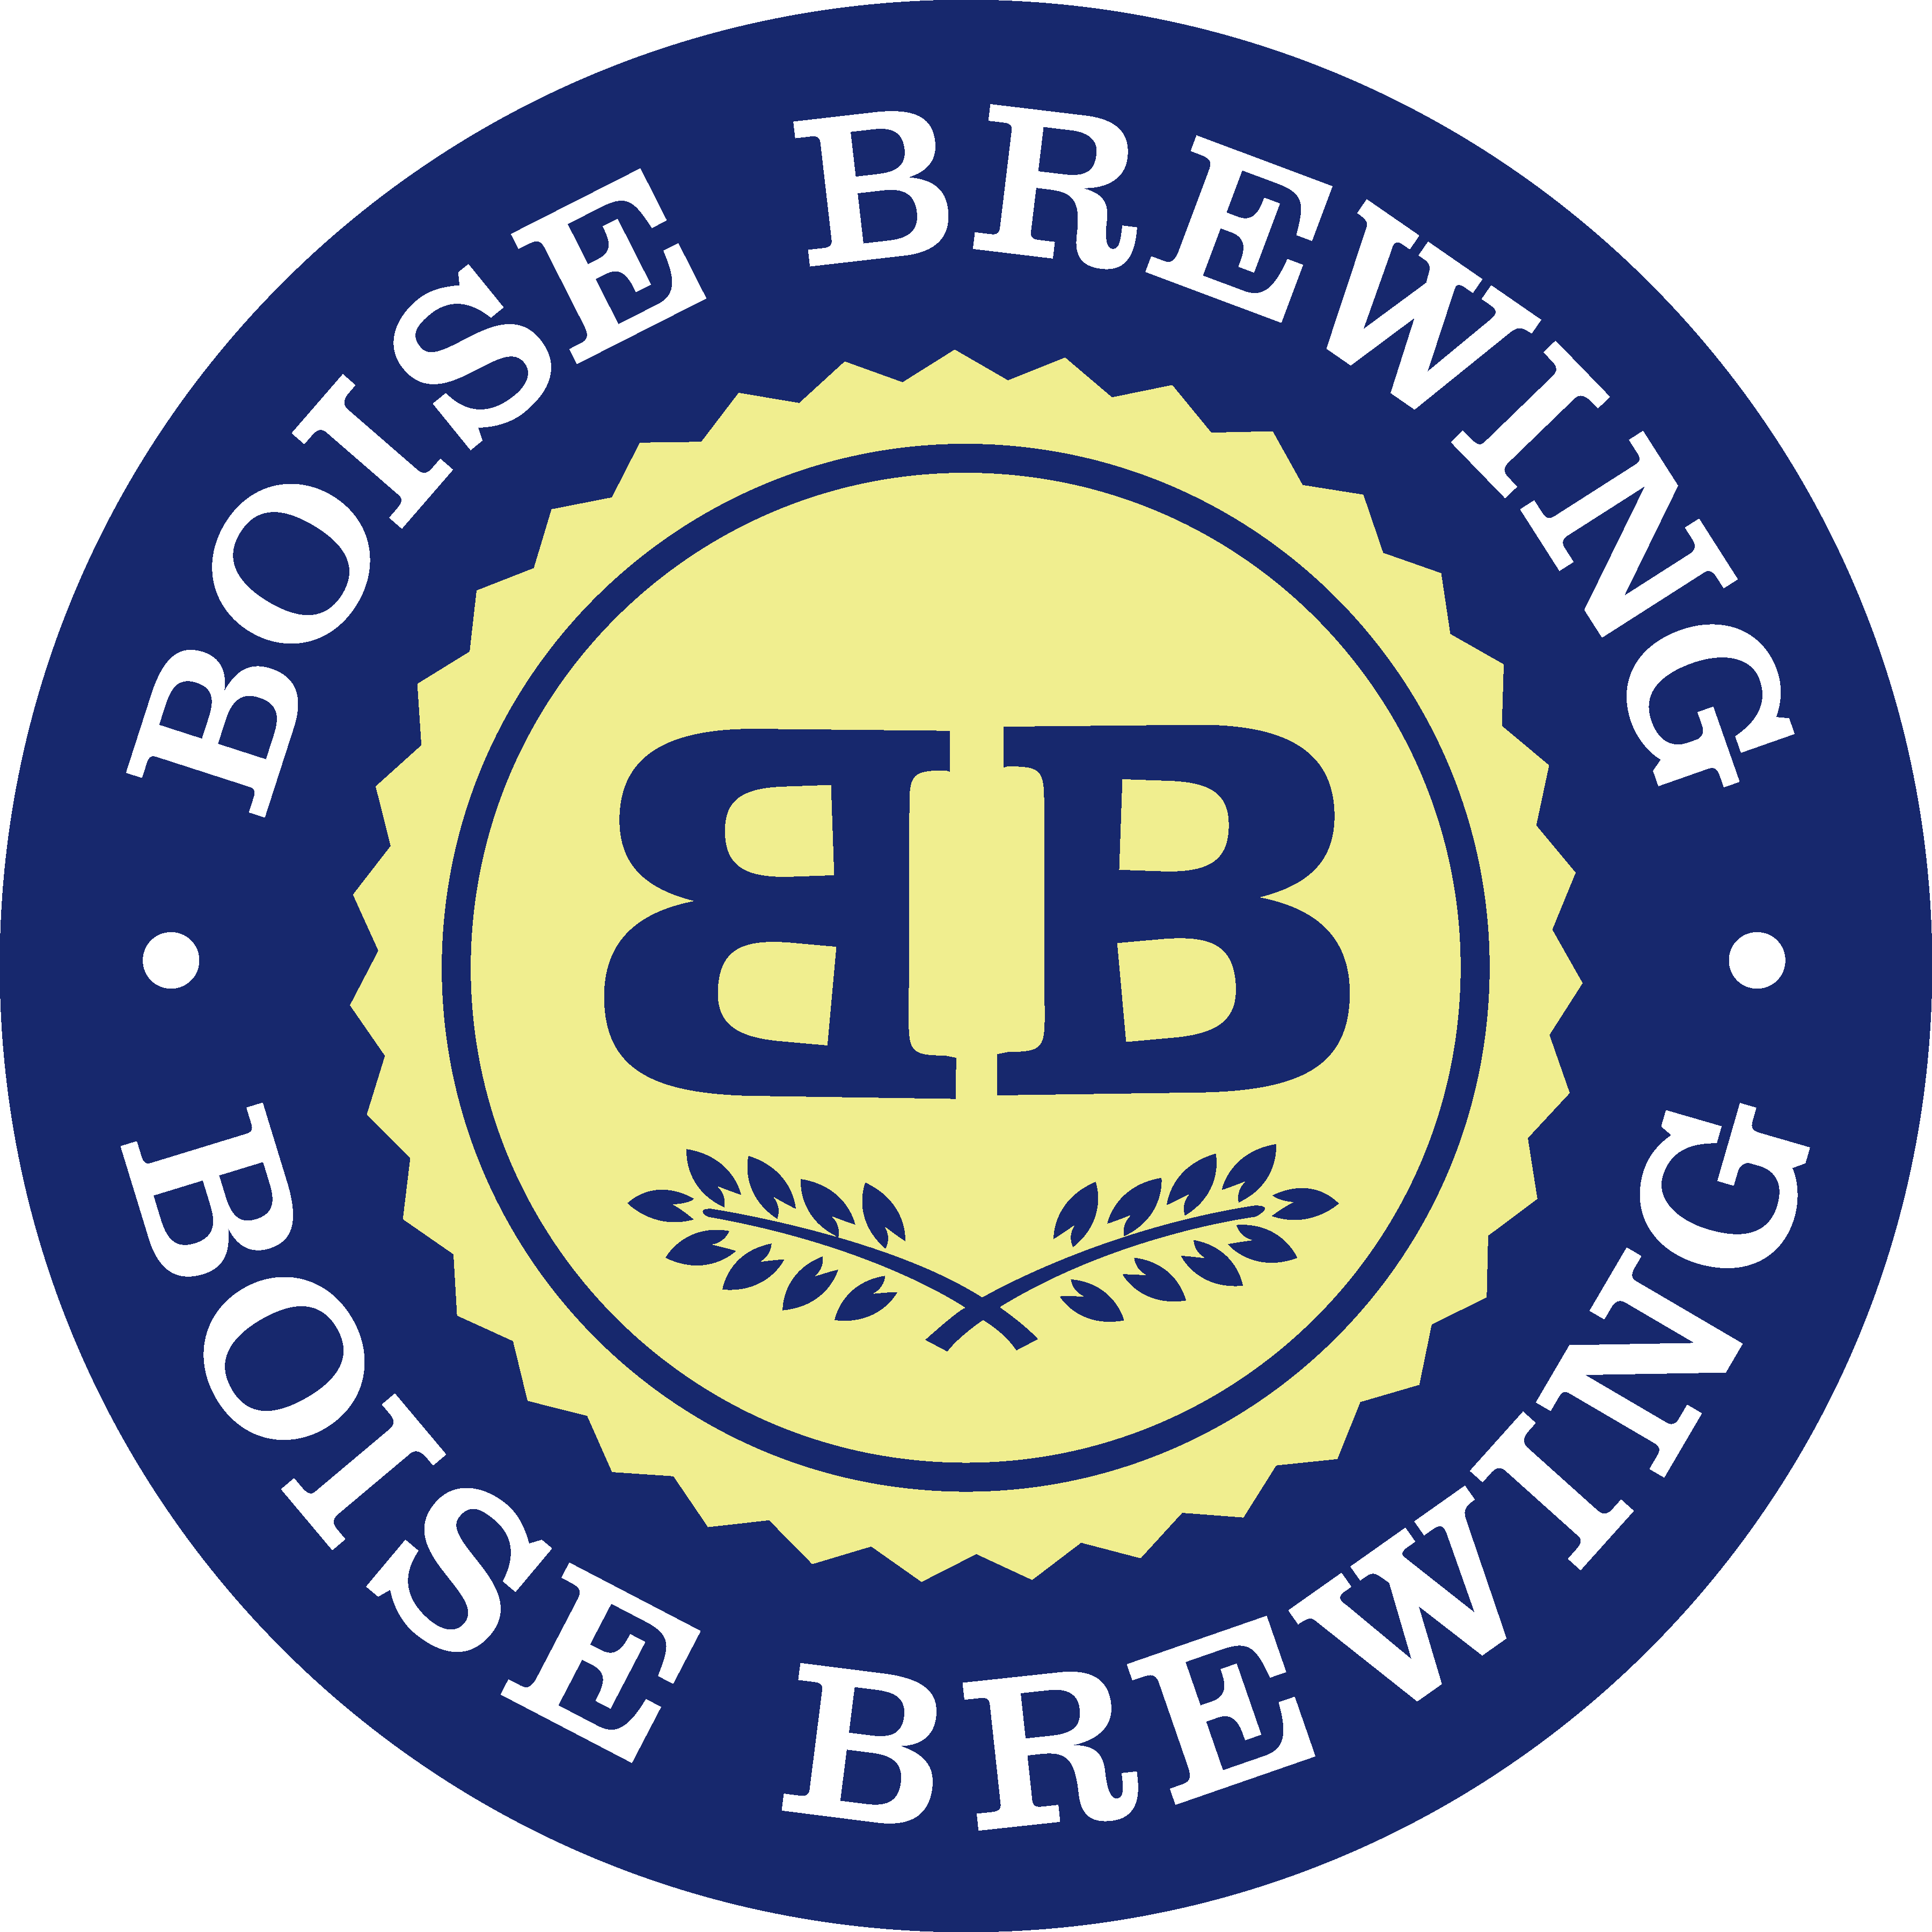 https://www.boisebrewing.com/wp-content/uploads/2020/01/TinTackerSign-12x12-round-1-01.png